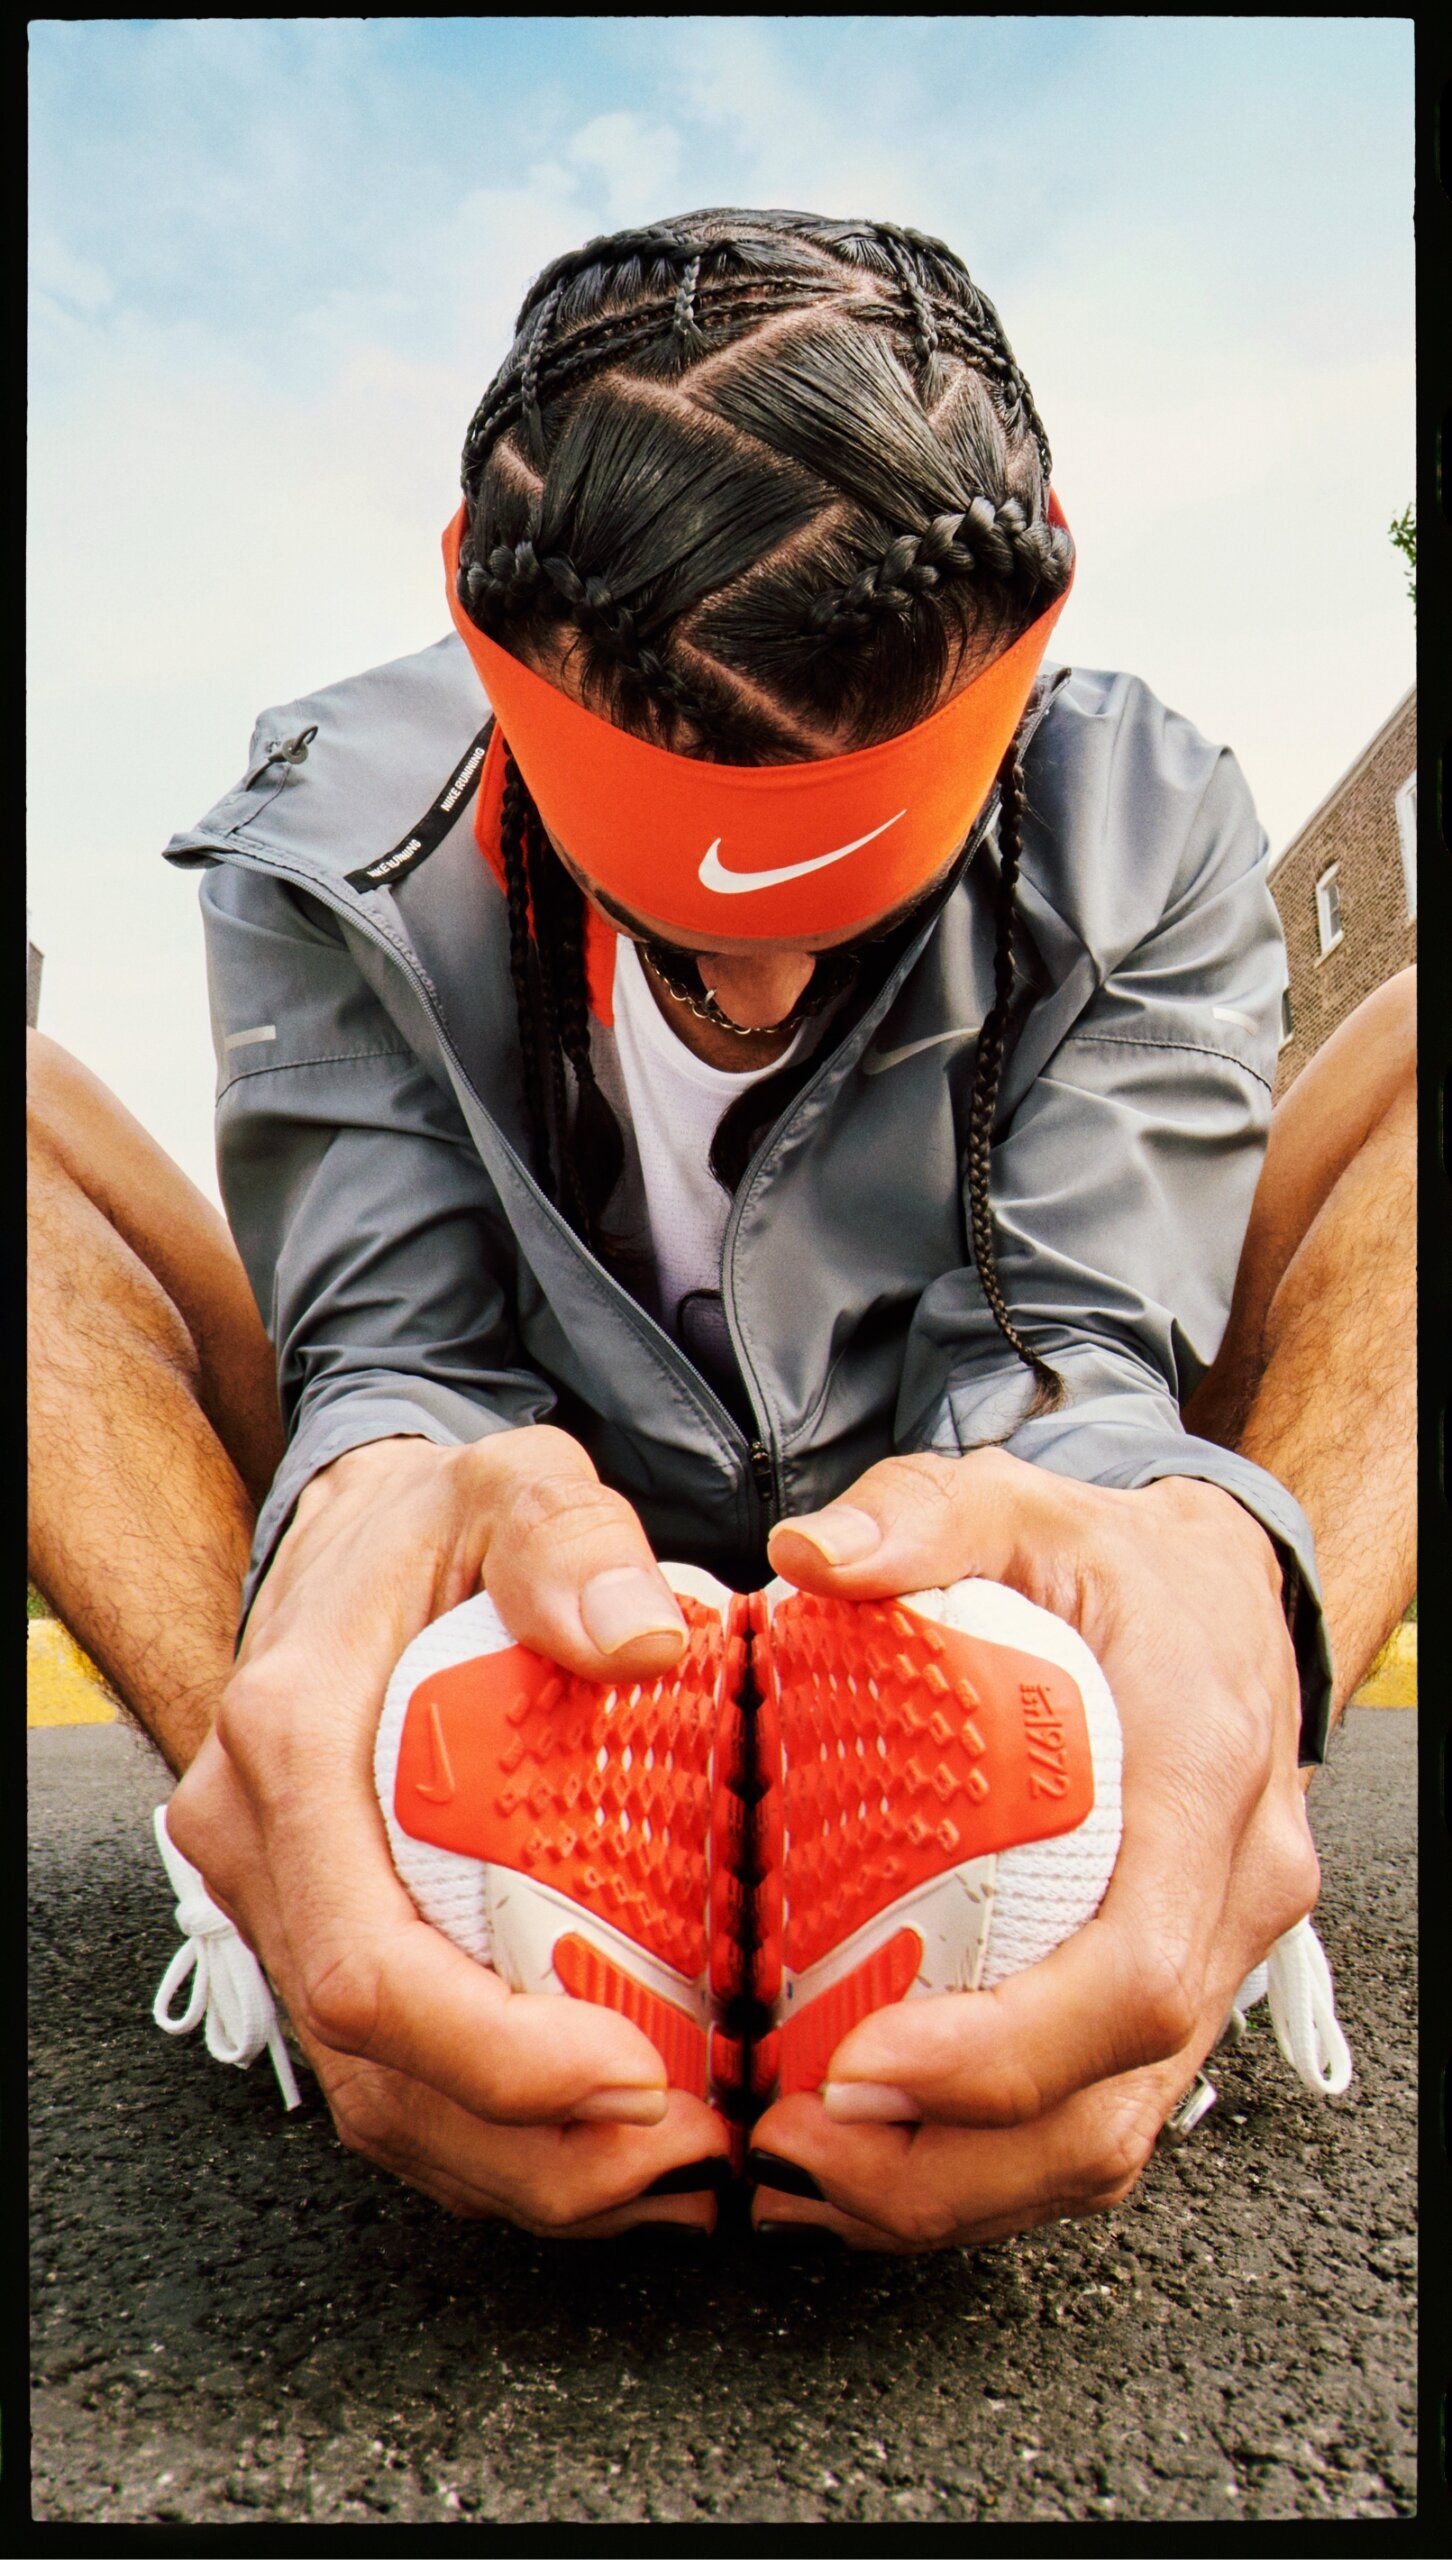 Man stretching in street in cobblers pose head down. He has geometric, parting and braiding in hair with orange nike headband.